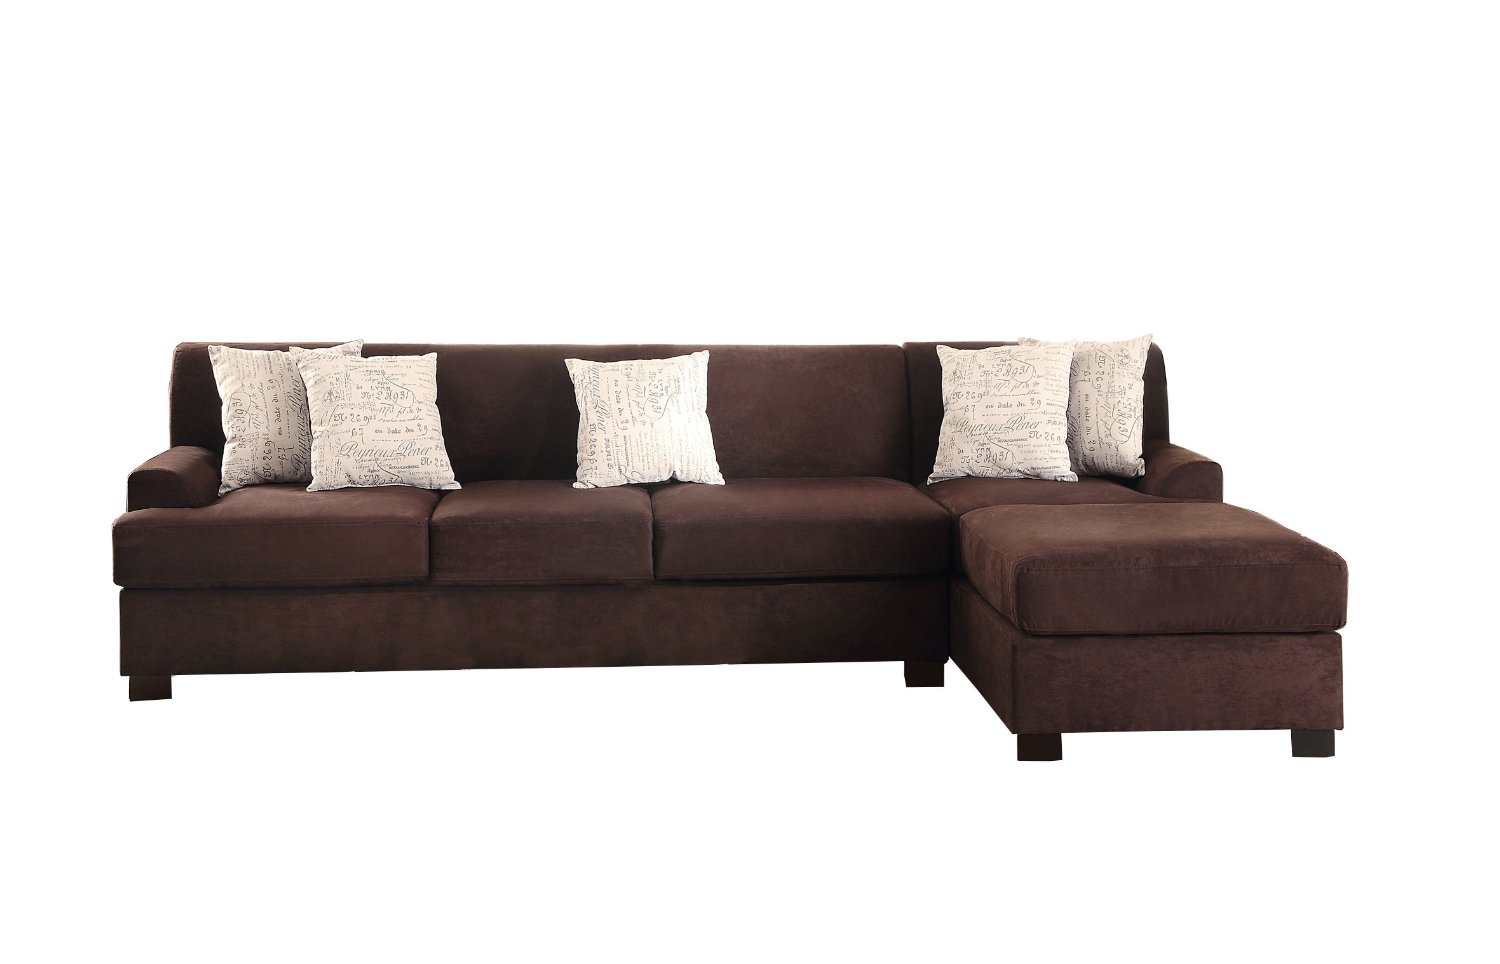 microsuede sectional sofa bed